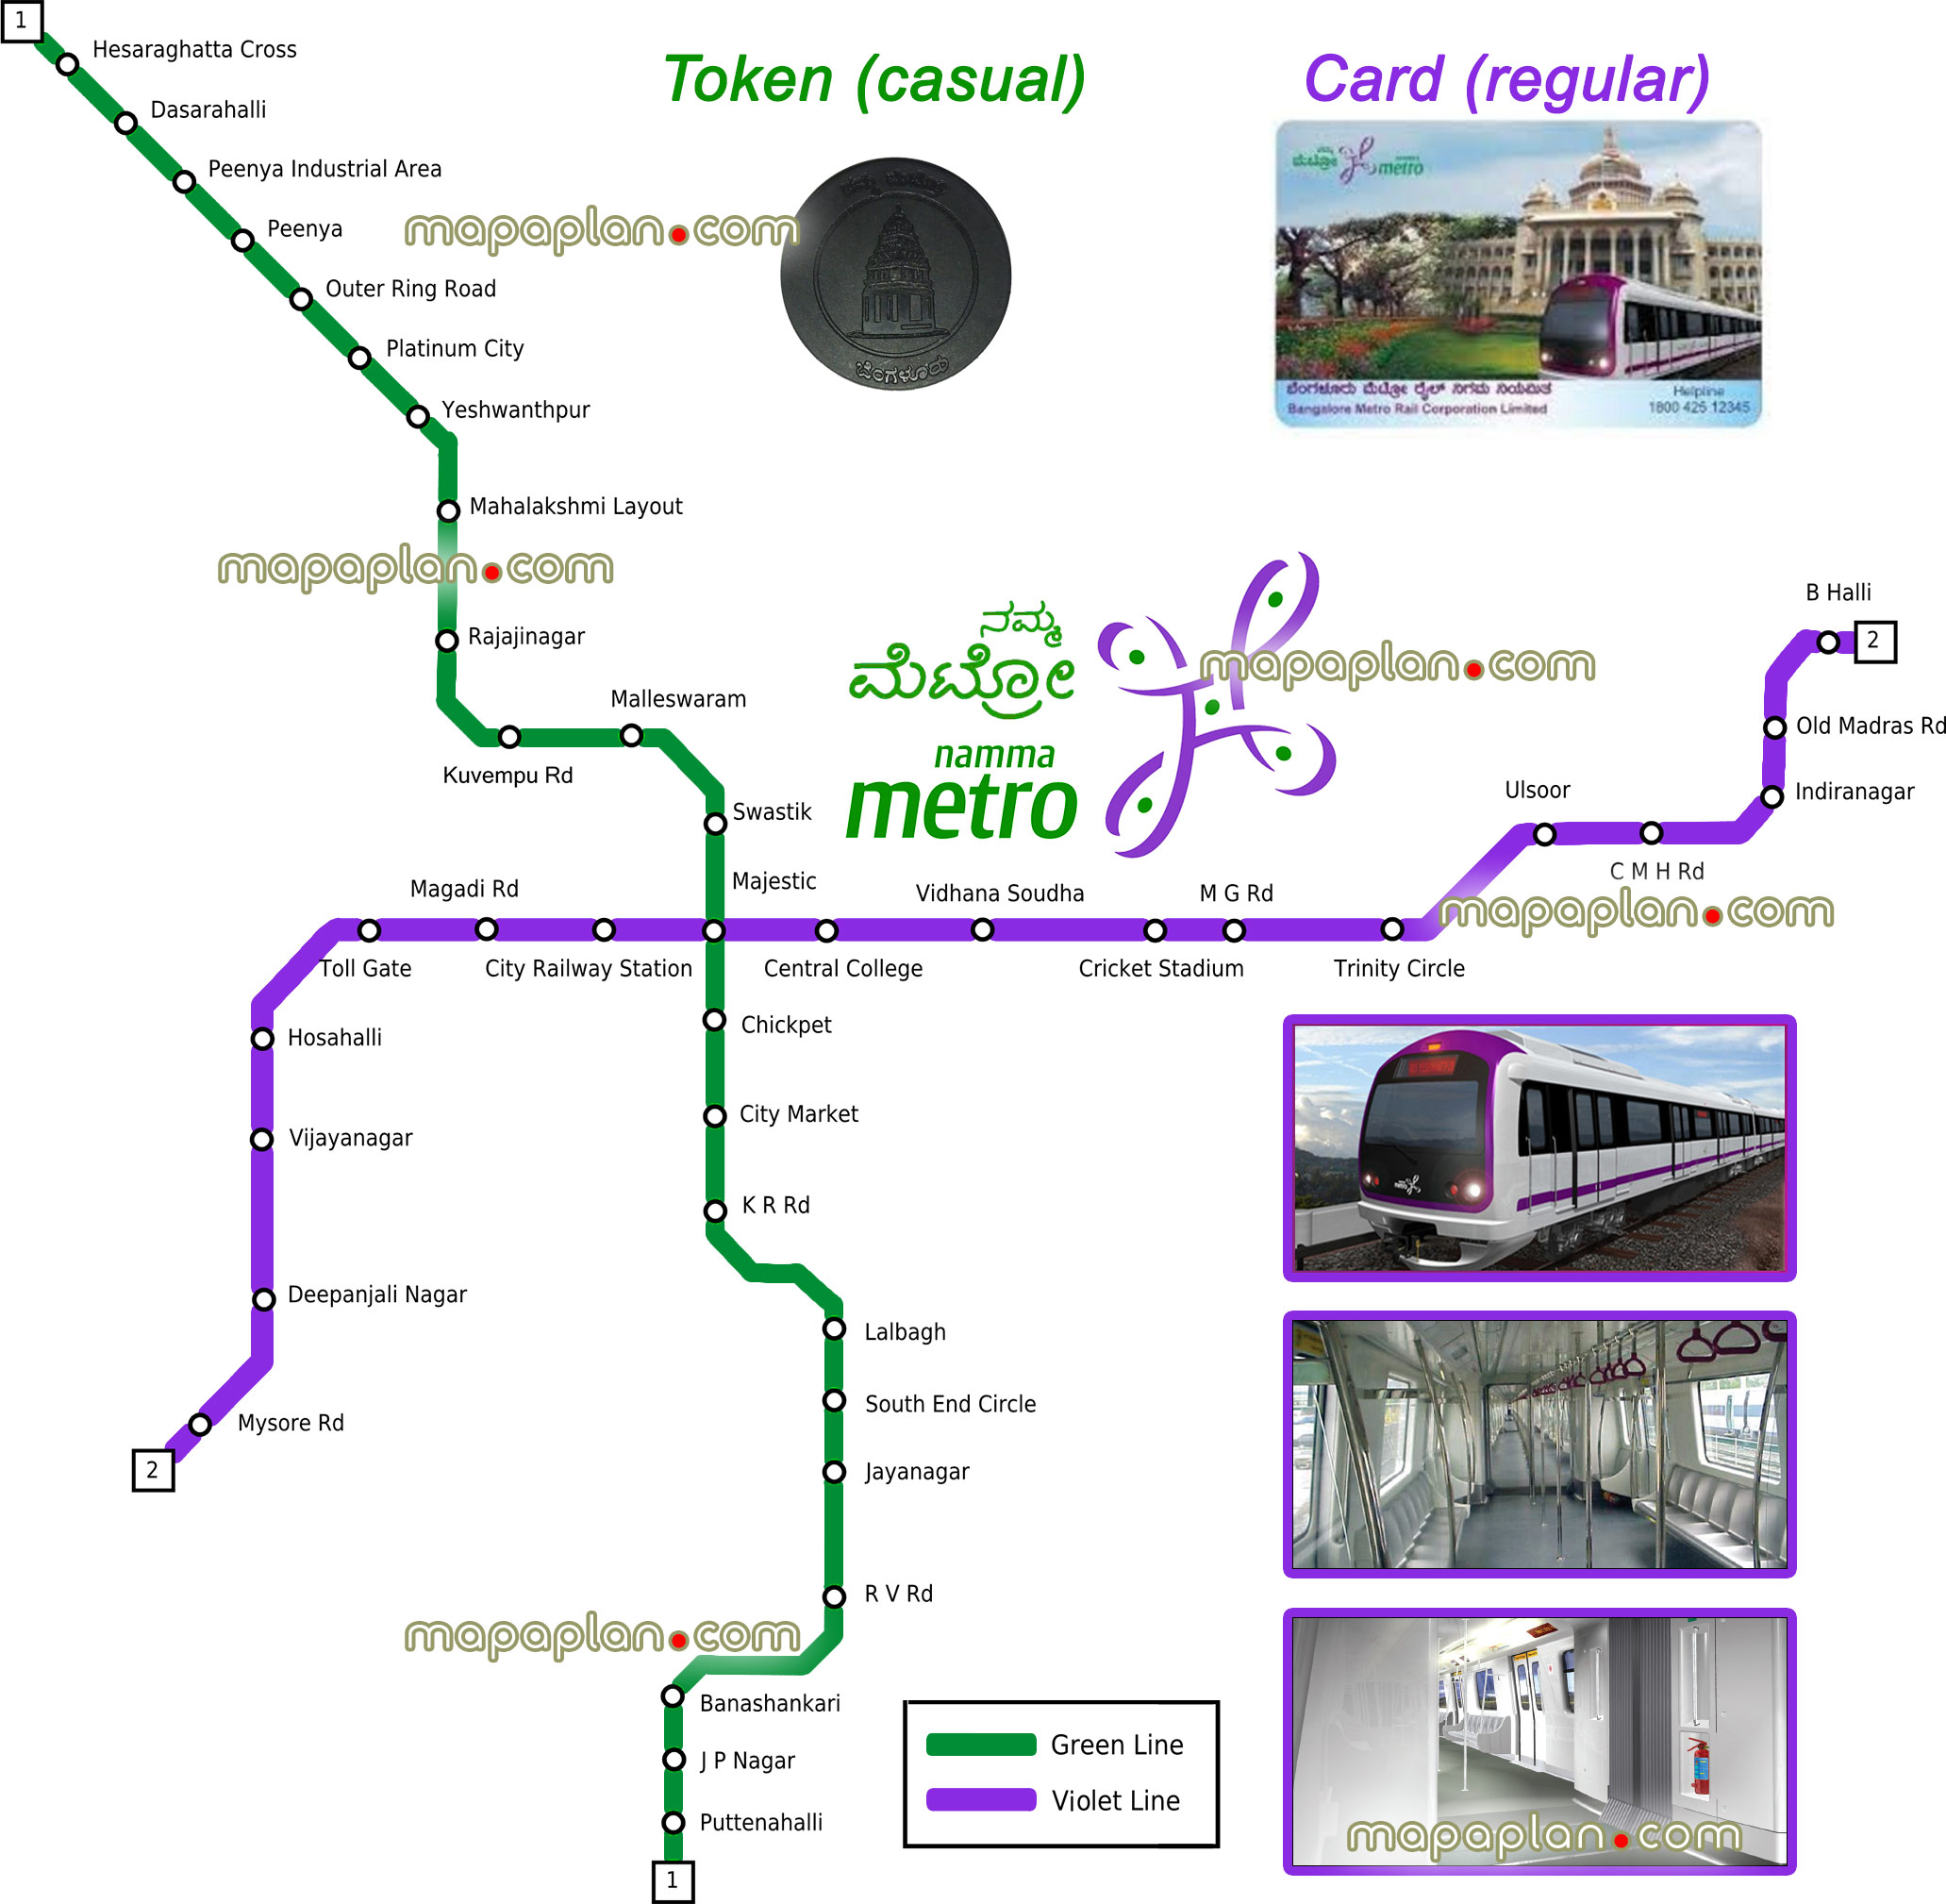 Bangalore metro new updated route public transport namma stations subway rail routes underground tube lines complete full hd plan free download interactive visitors guide central green violet metro train stations photo image tourist information guides Bangalore Top tourist attractions map